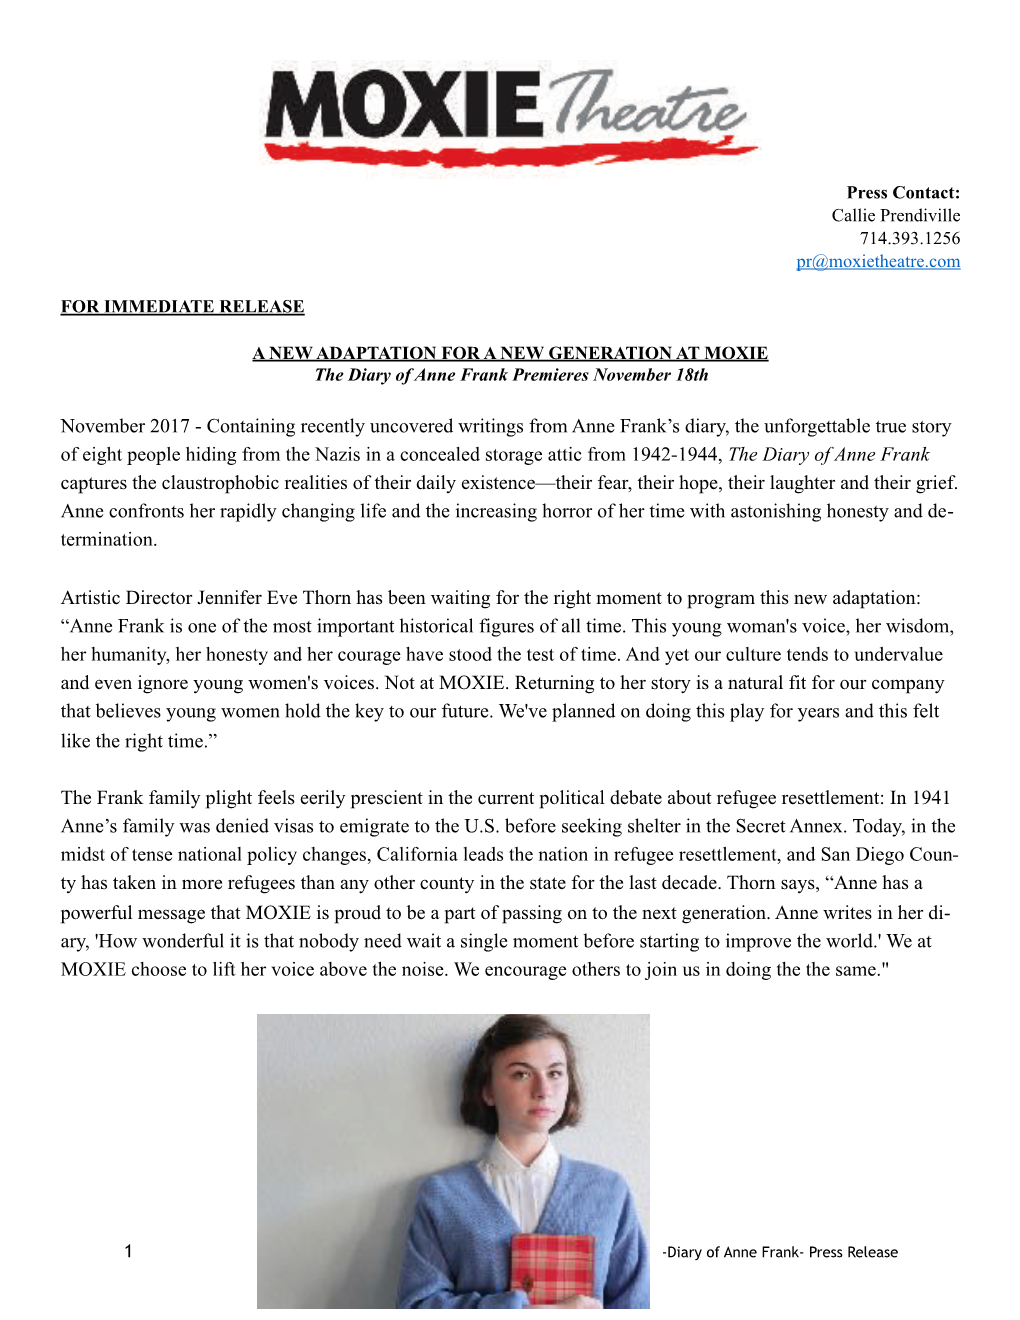 MOXIE Press Release the DIARY of ANNE FRANK